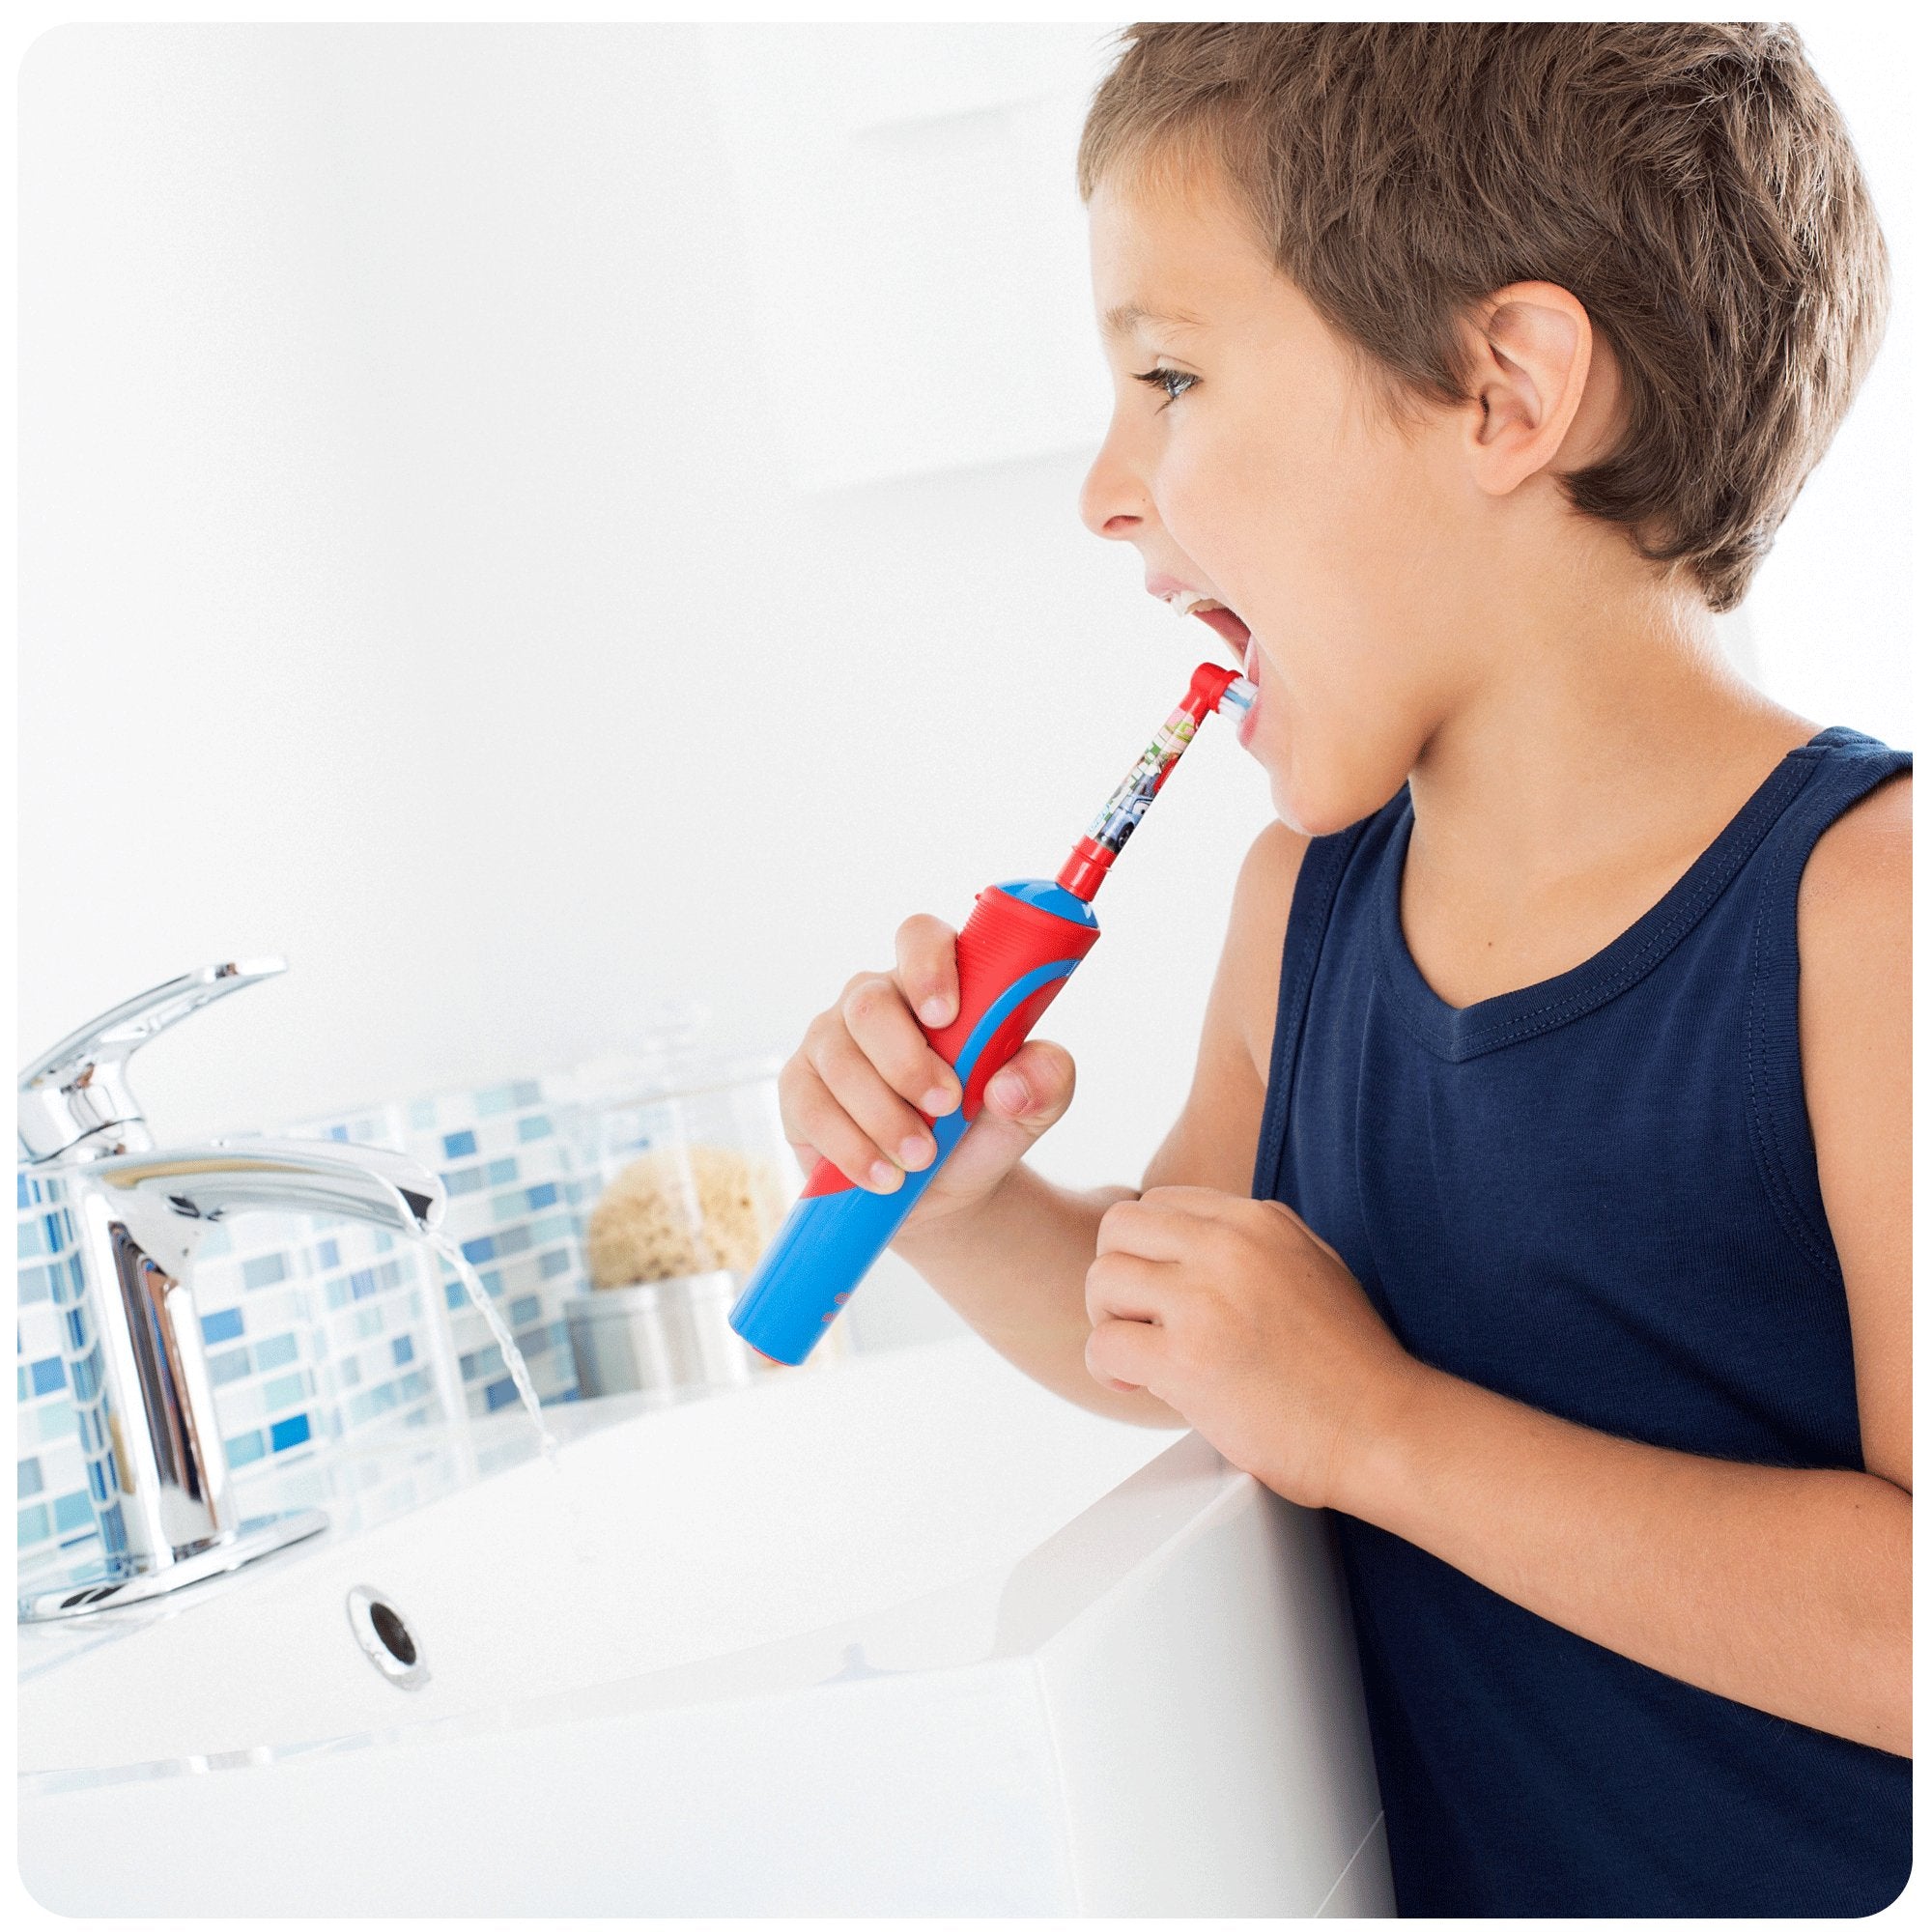 Oral-B Cars Kids Electric Rechargeable Toothbrush with 2 Replacement Brush Heads - Healthxpress.ie